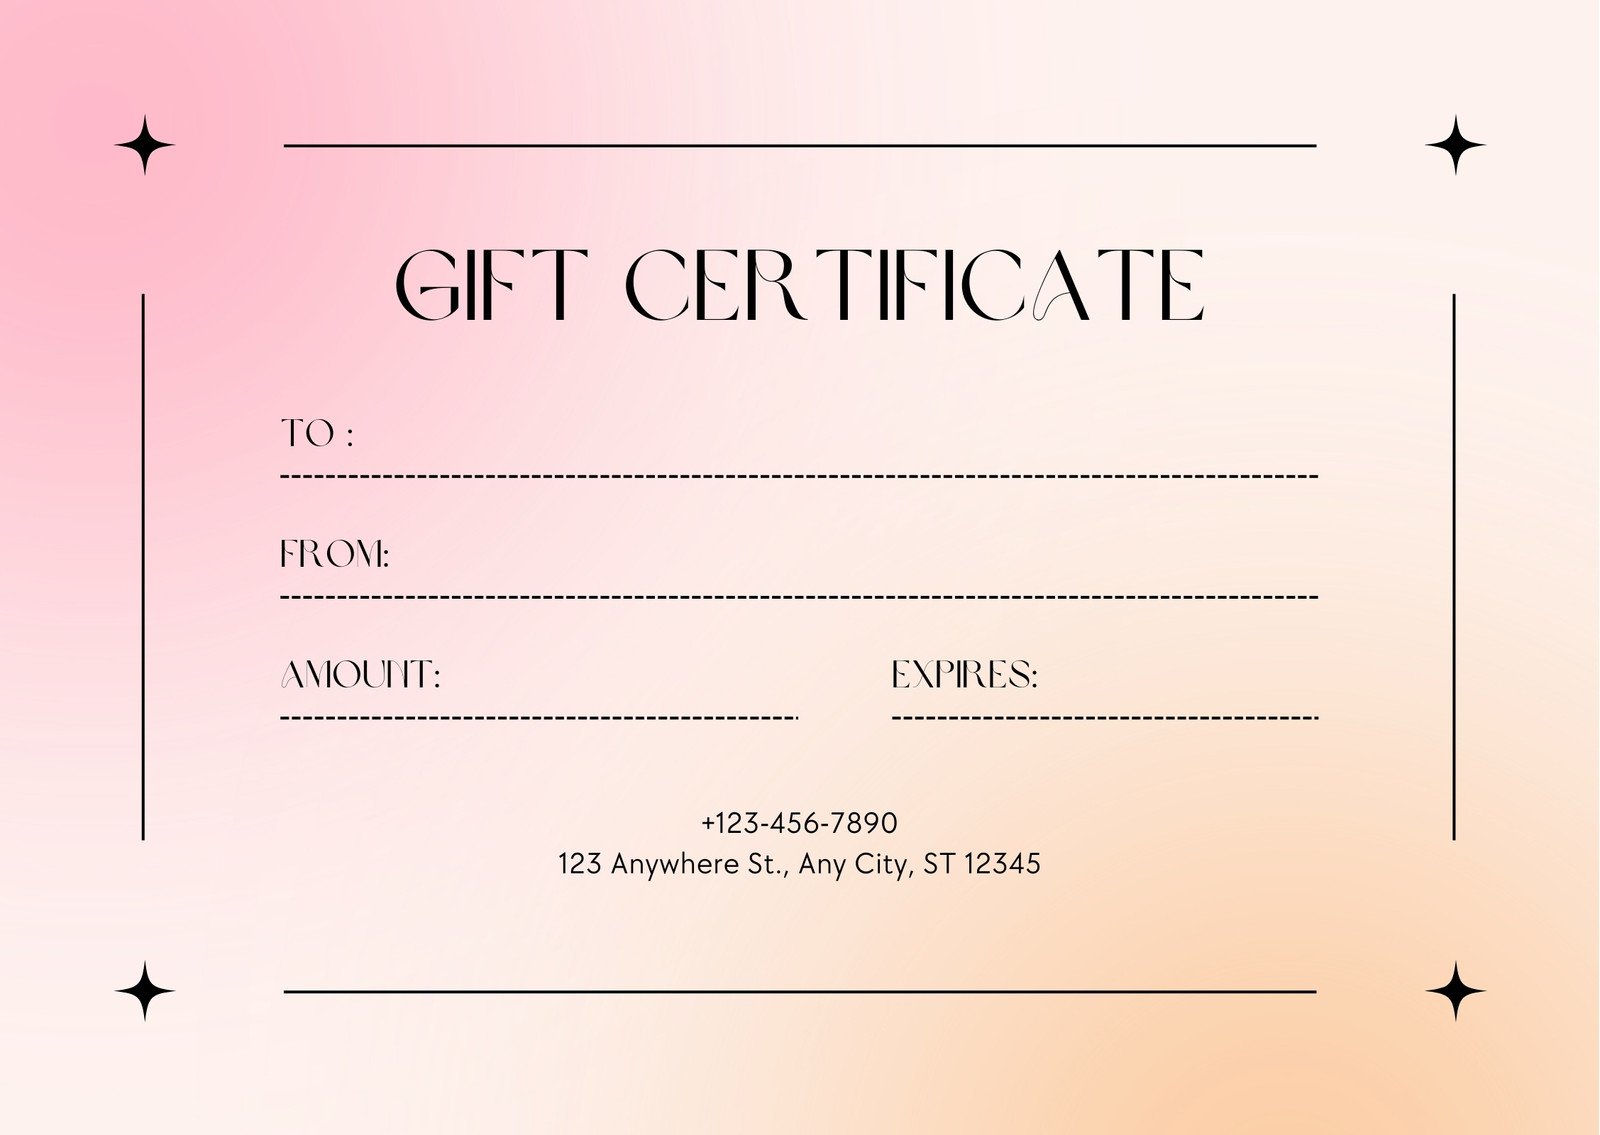 Gift Certificate Template Pdf vlr eng br